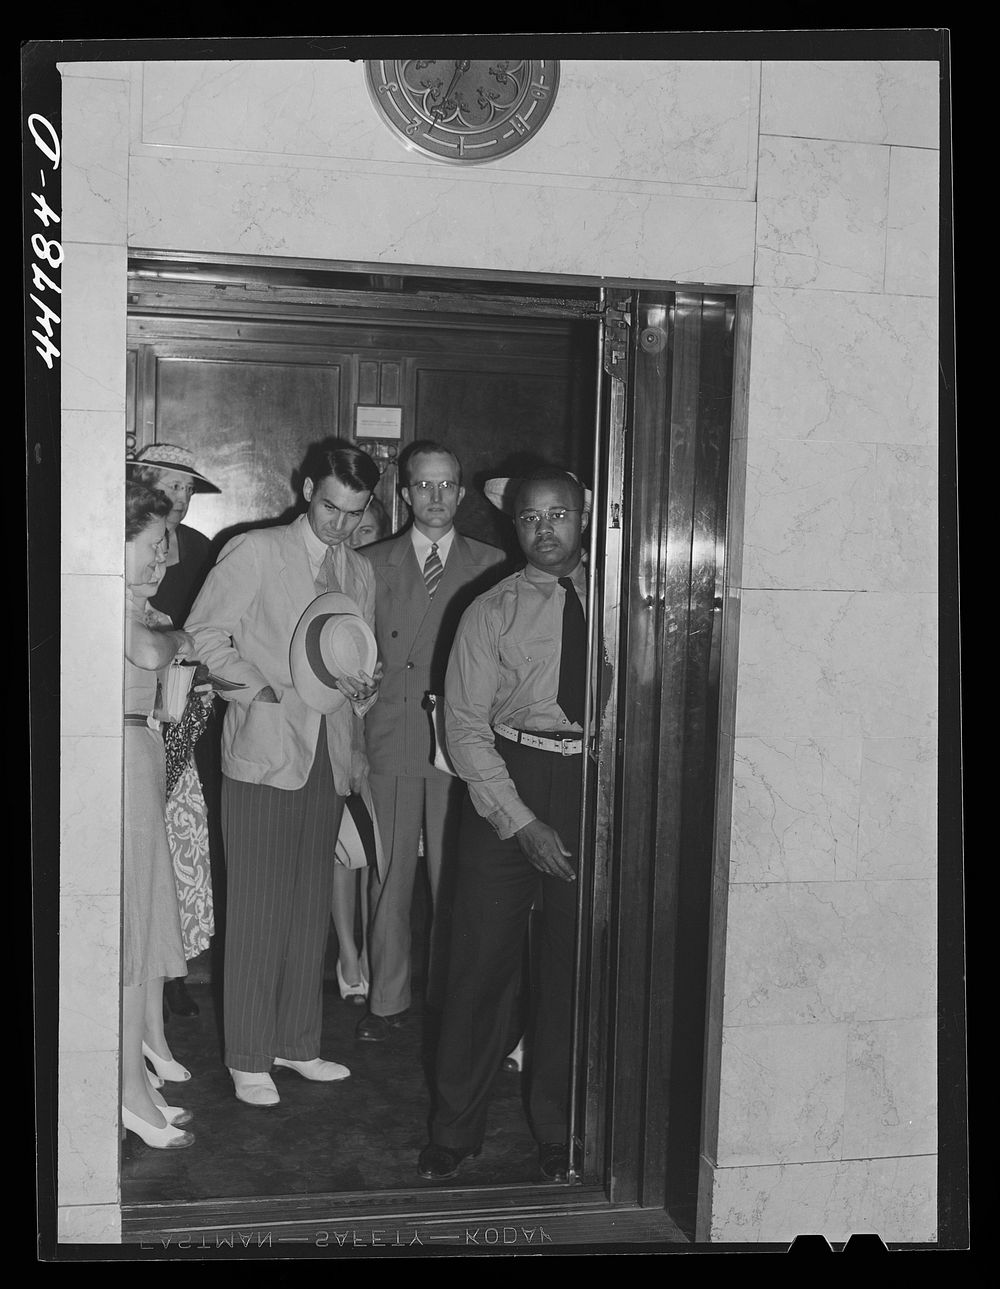 [Untitled photo, possibly related to: Elevator operator in the Barr Building. Washington, D.C.]. Sourced from the Library of…